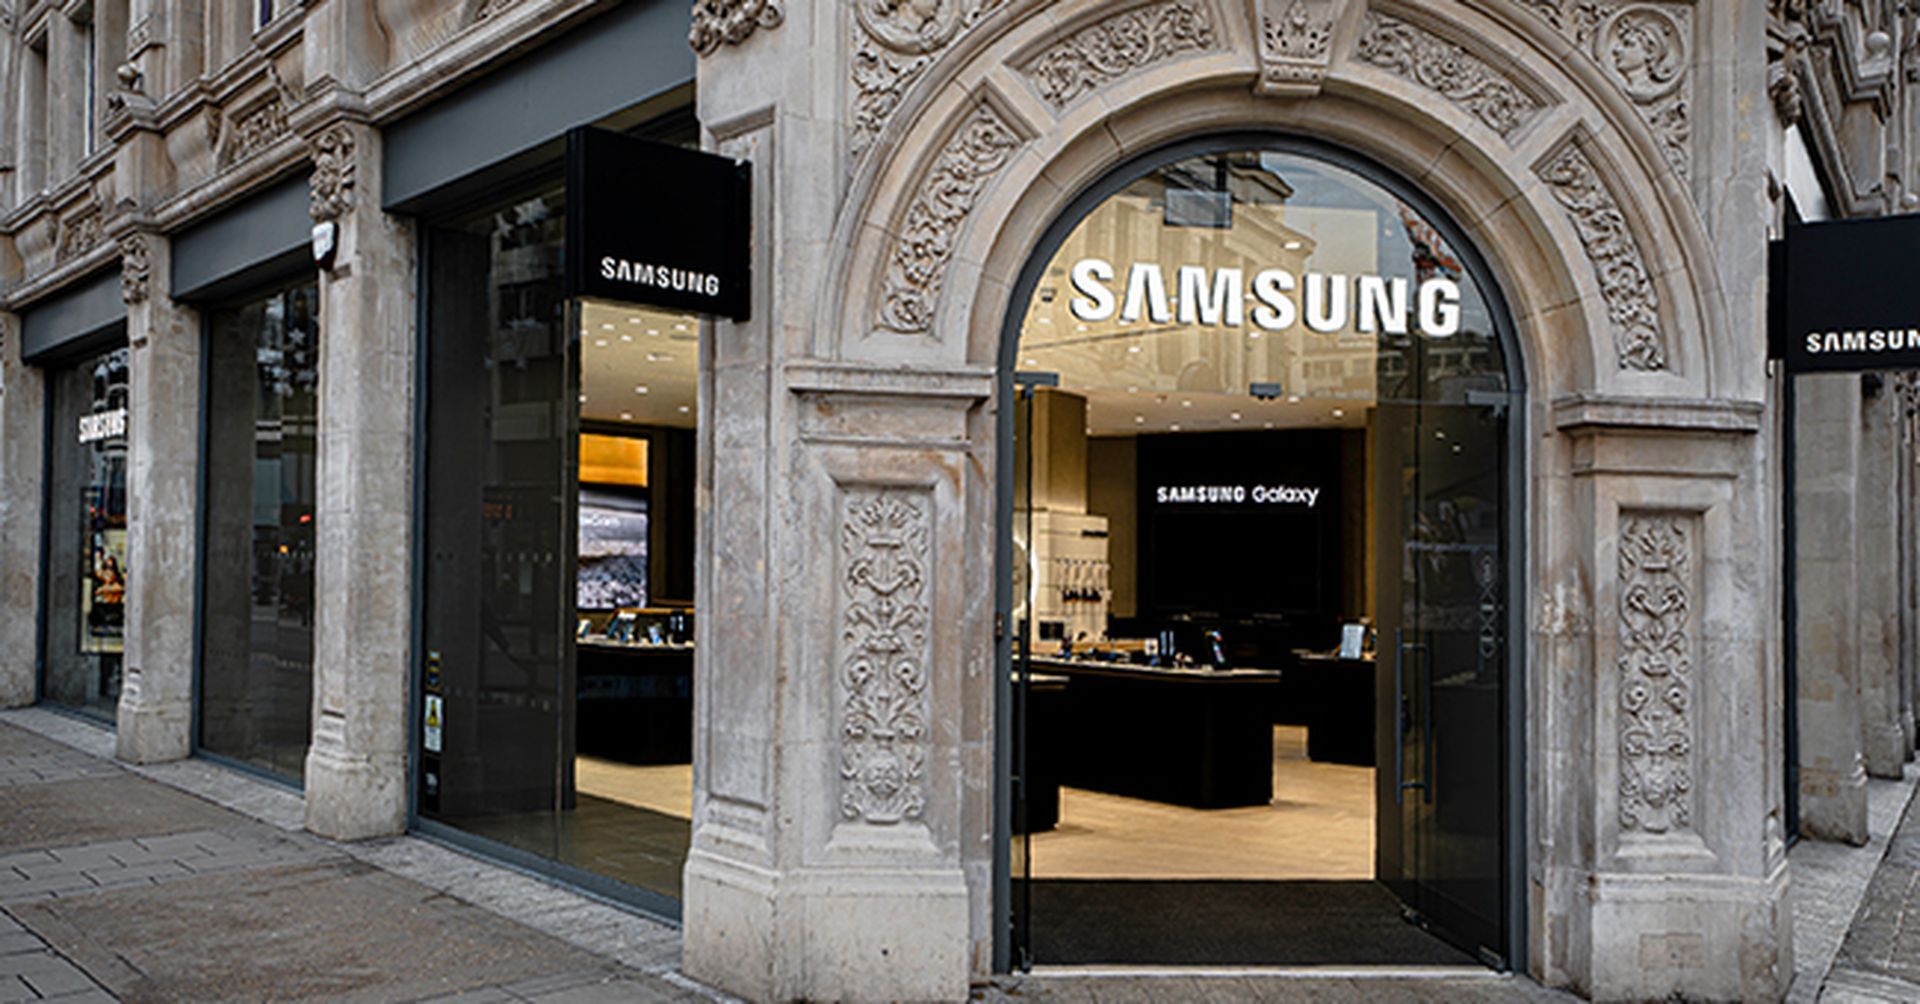 If you bought something through Samsung UK, your data might be compromised